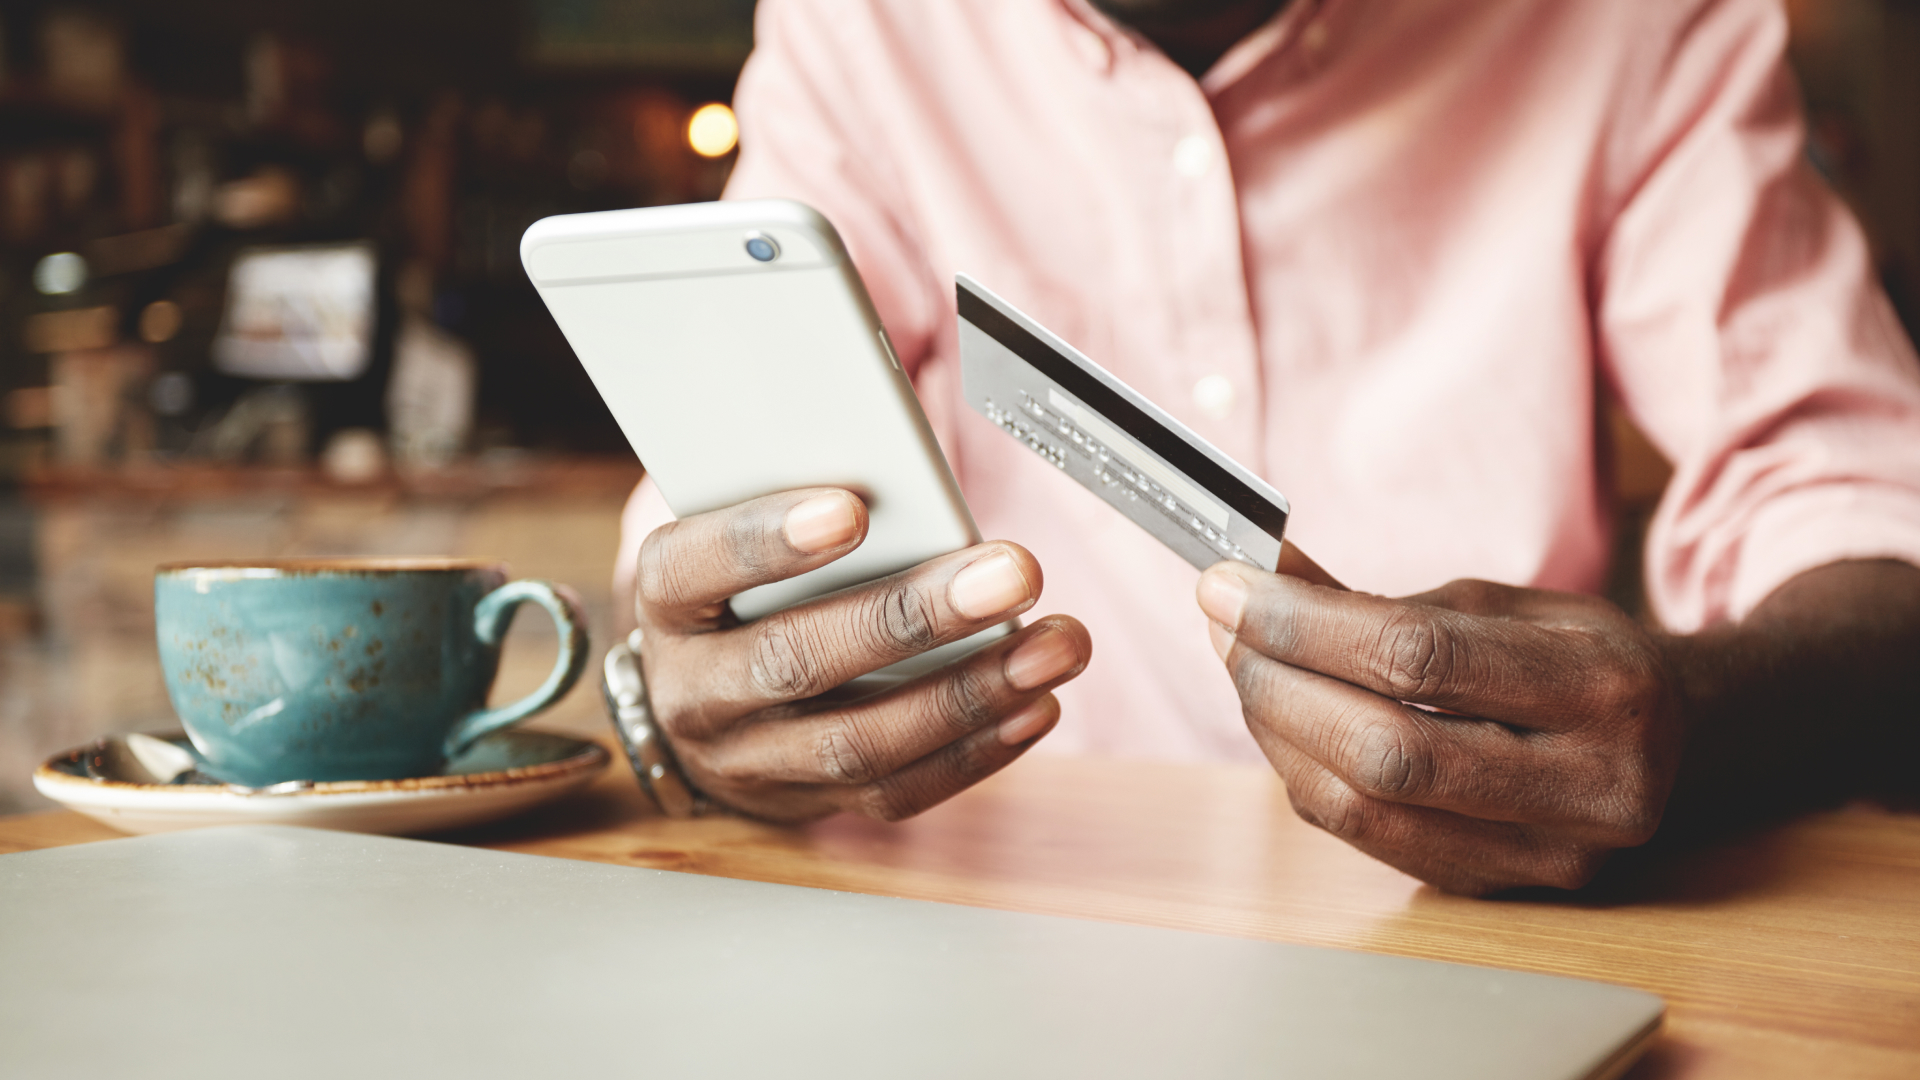 The next generation of bank loyalty in Africa